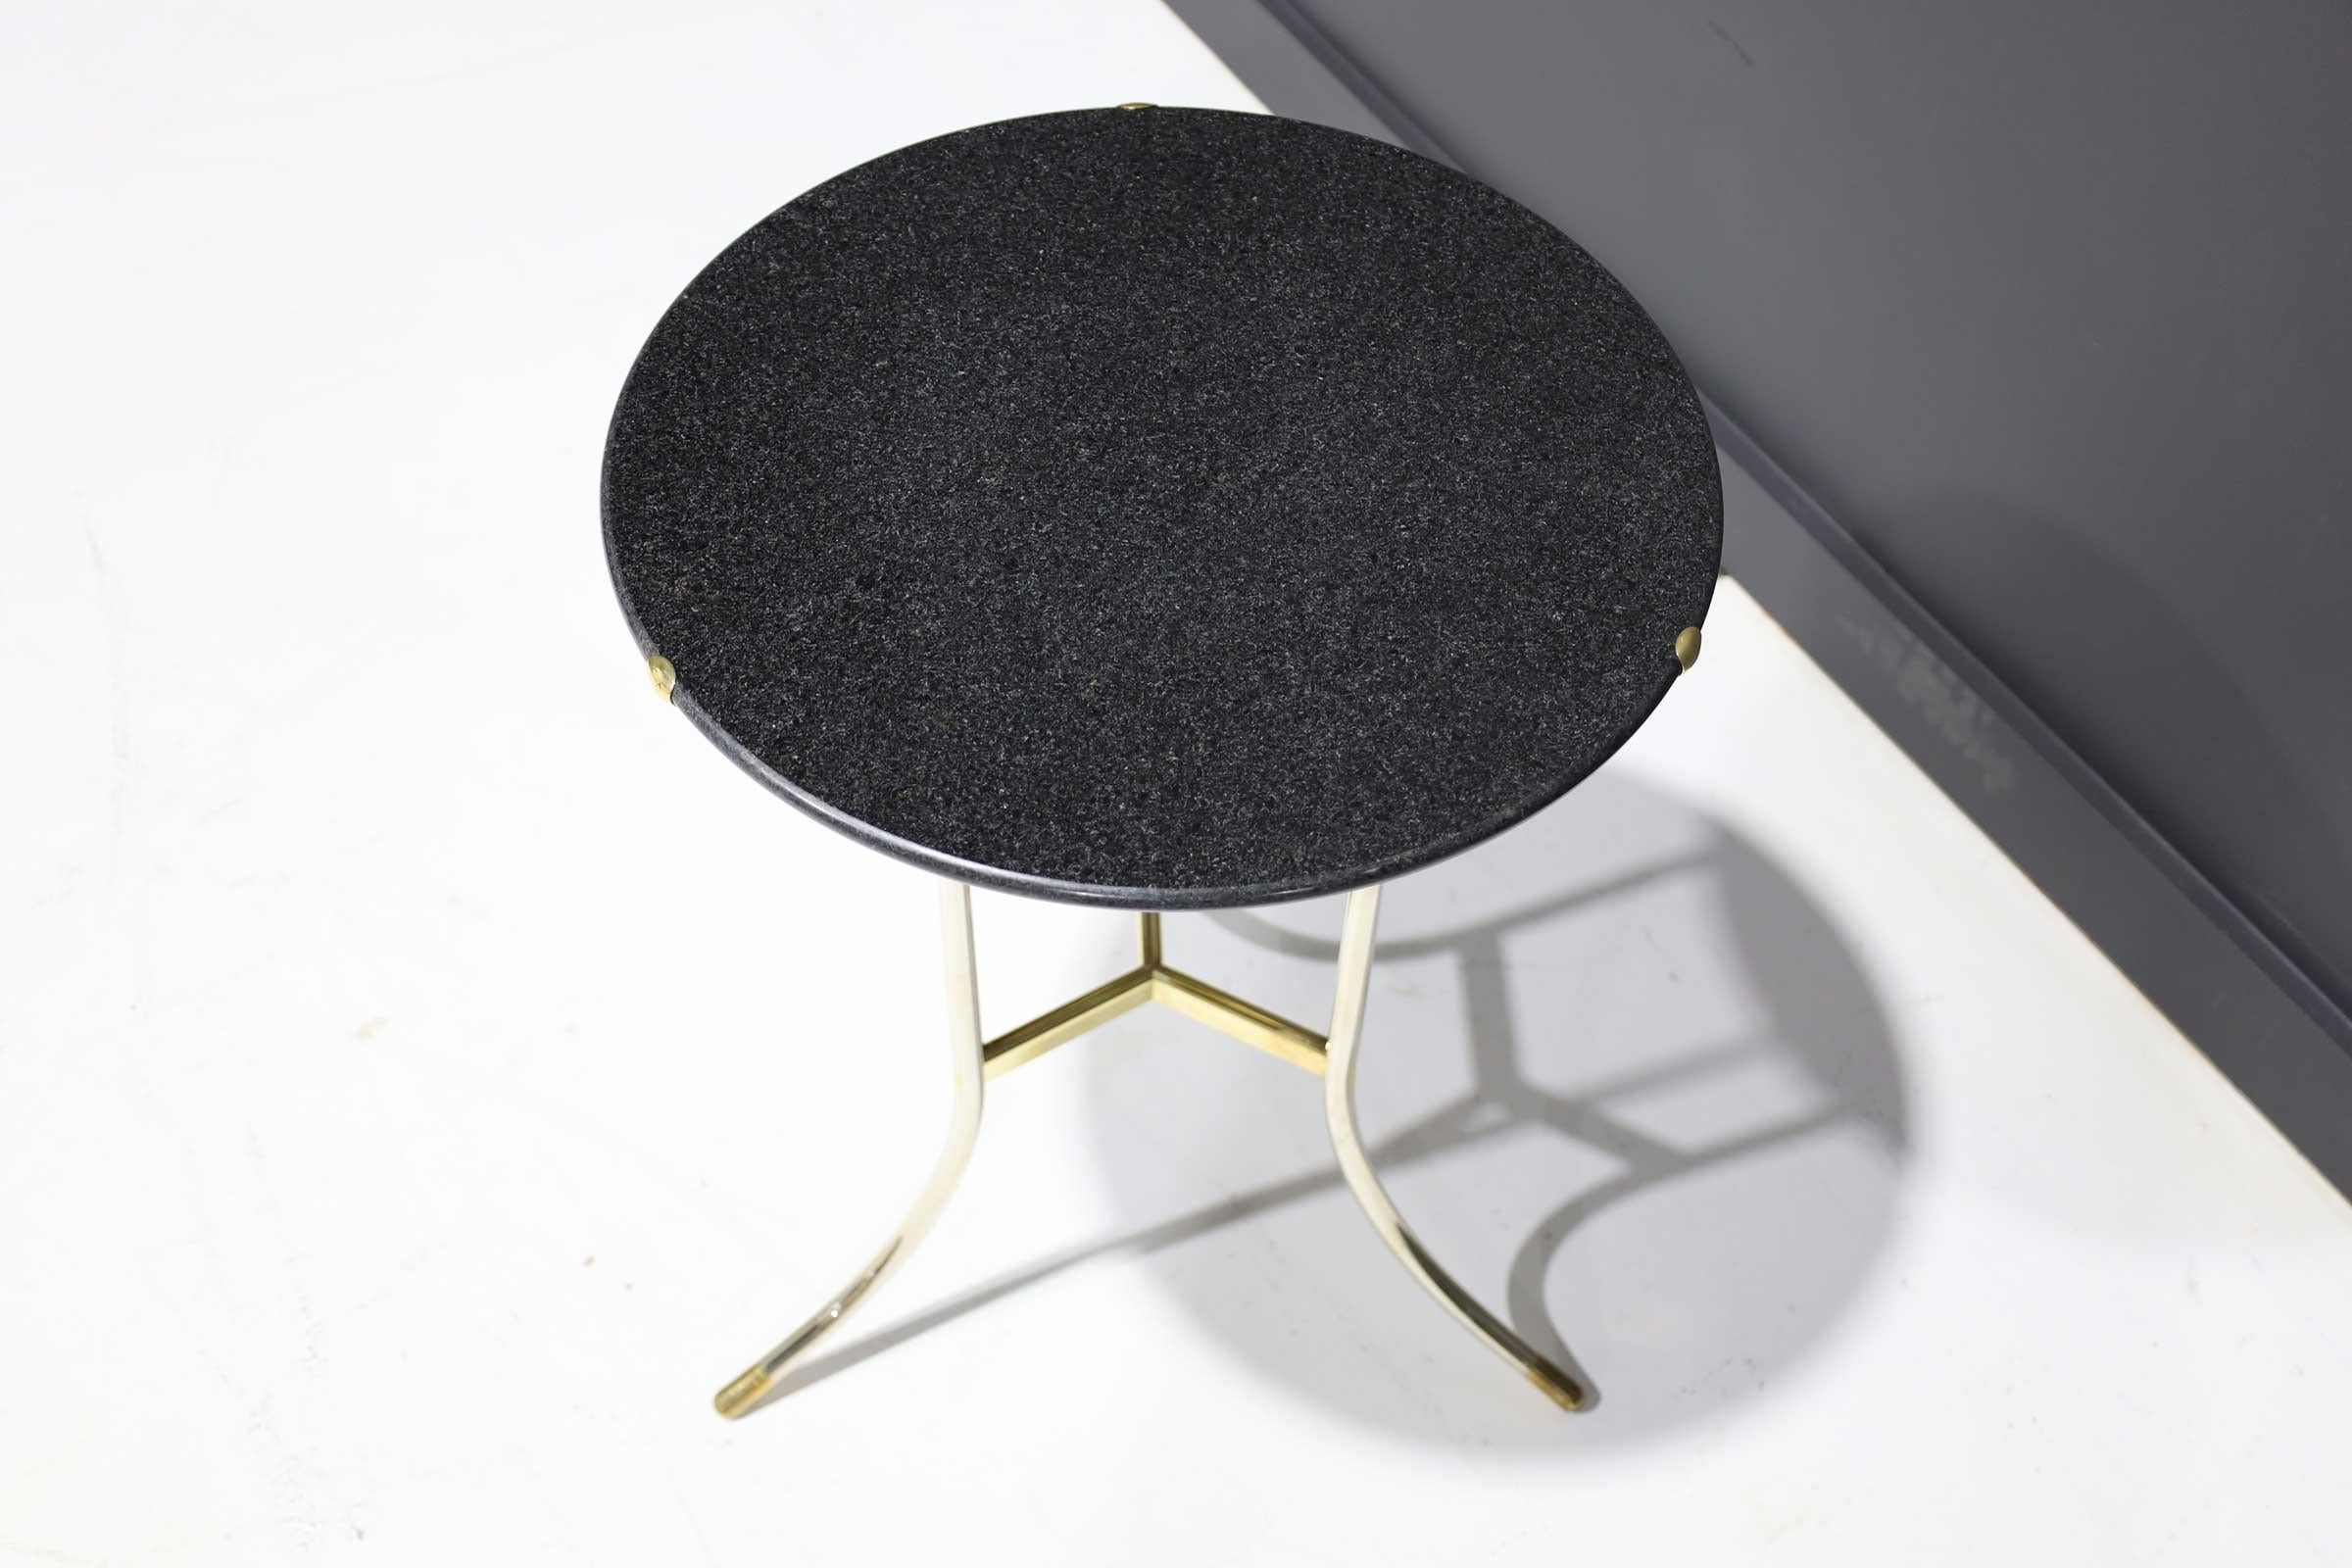 A classic Cedric Hartman table. Polished steel and brass base with polished black granite top. Signed and numbered.